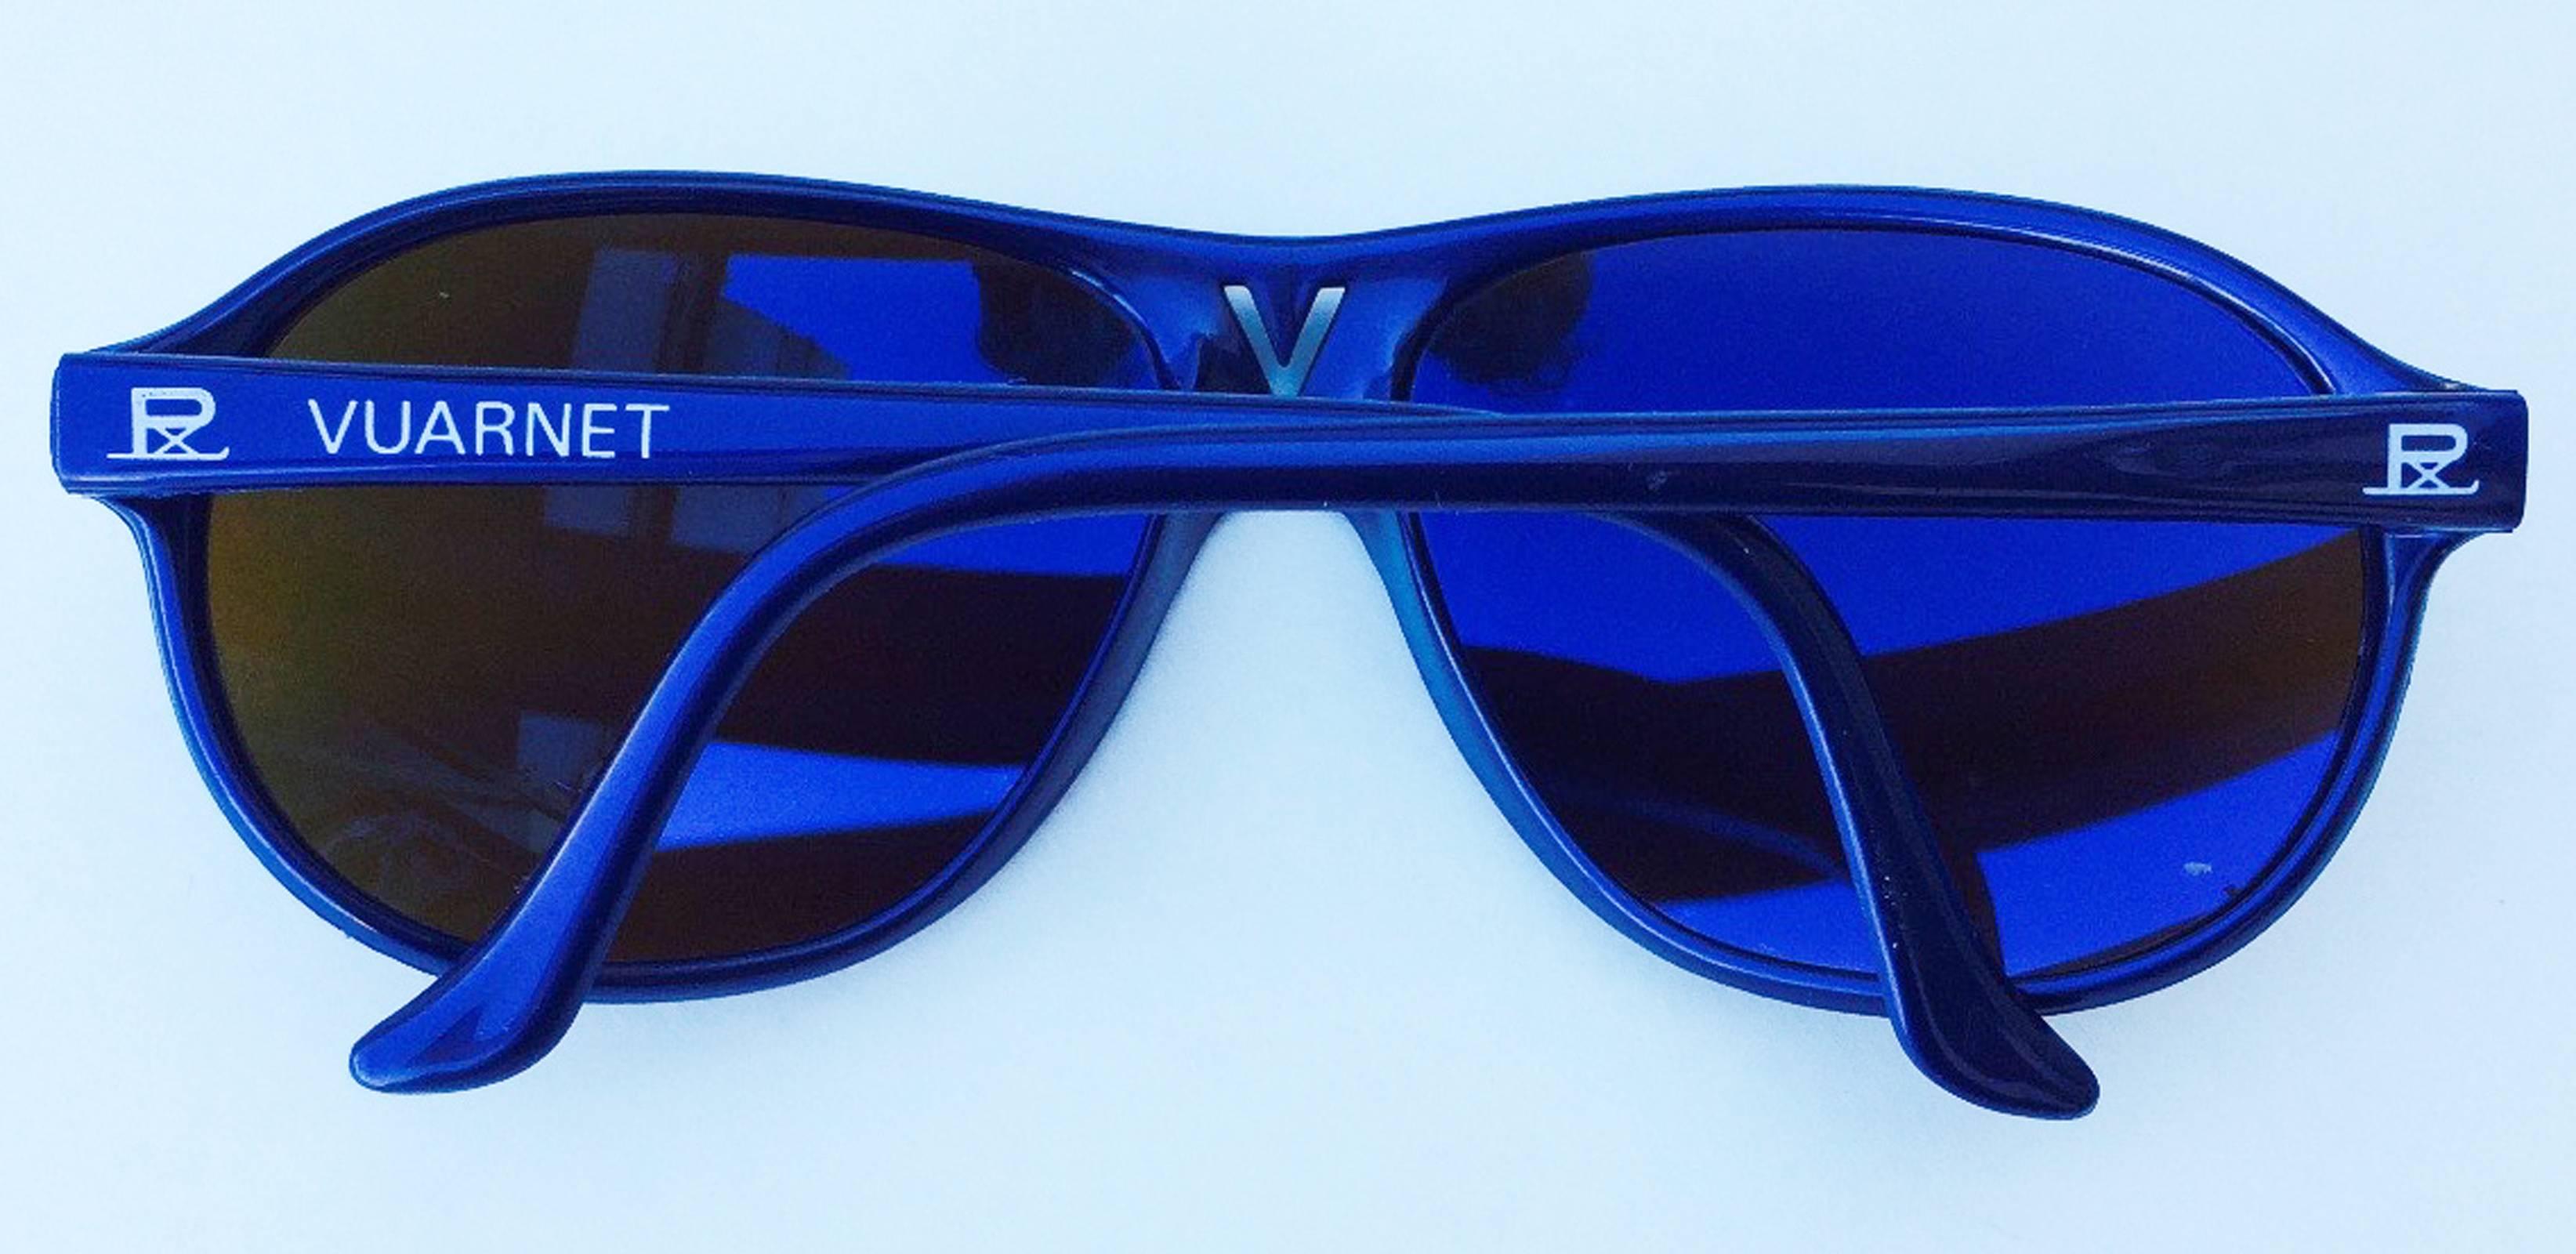 A fine vintage pair Vuarnet Skilynx-Acier ski sunglasses. Authentic blue vinyl frame item made in France. Original tinted lenses and signature case intact. Excellent with no issues.